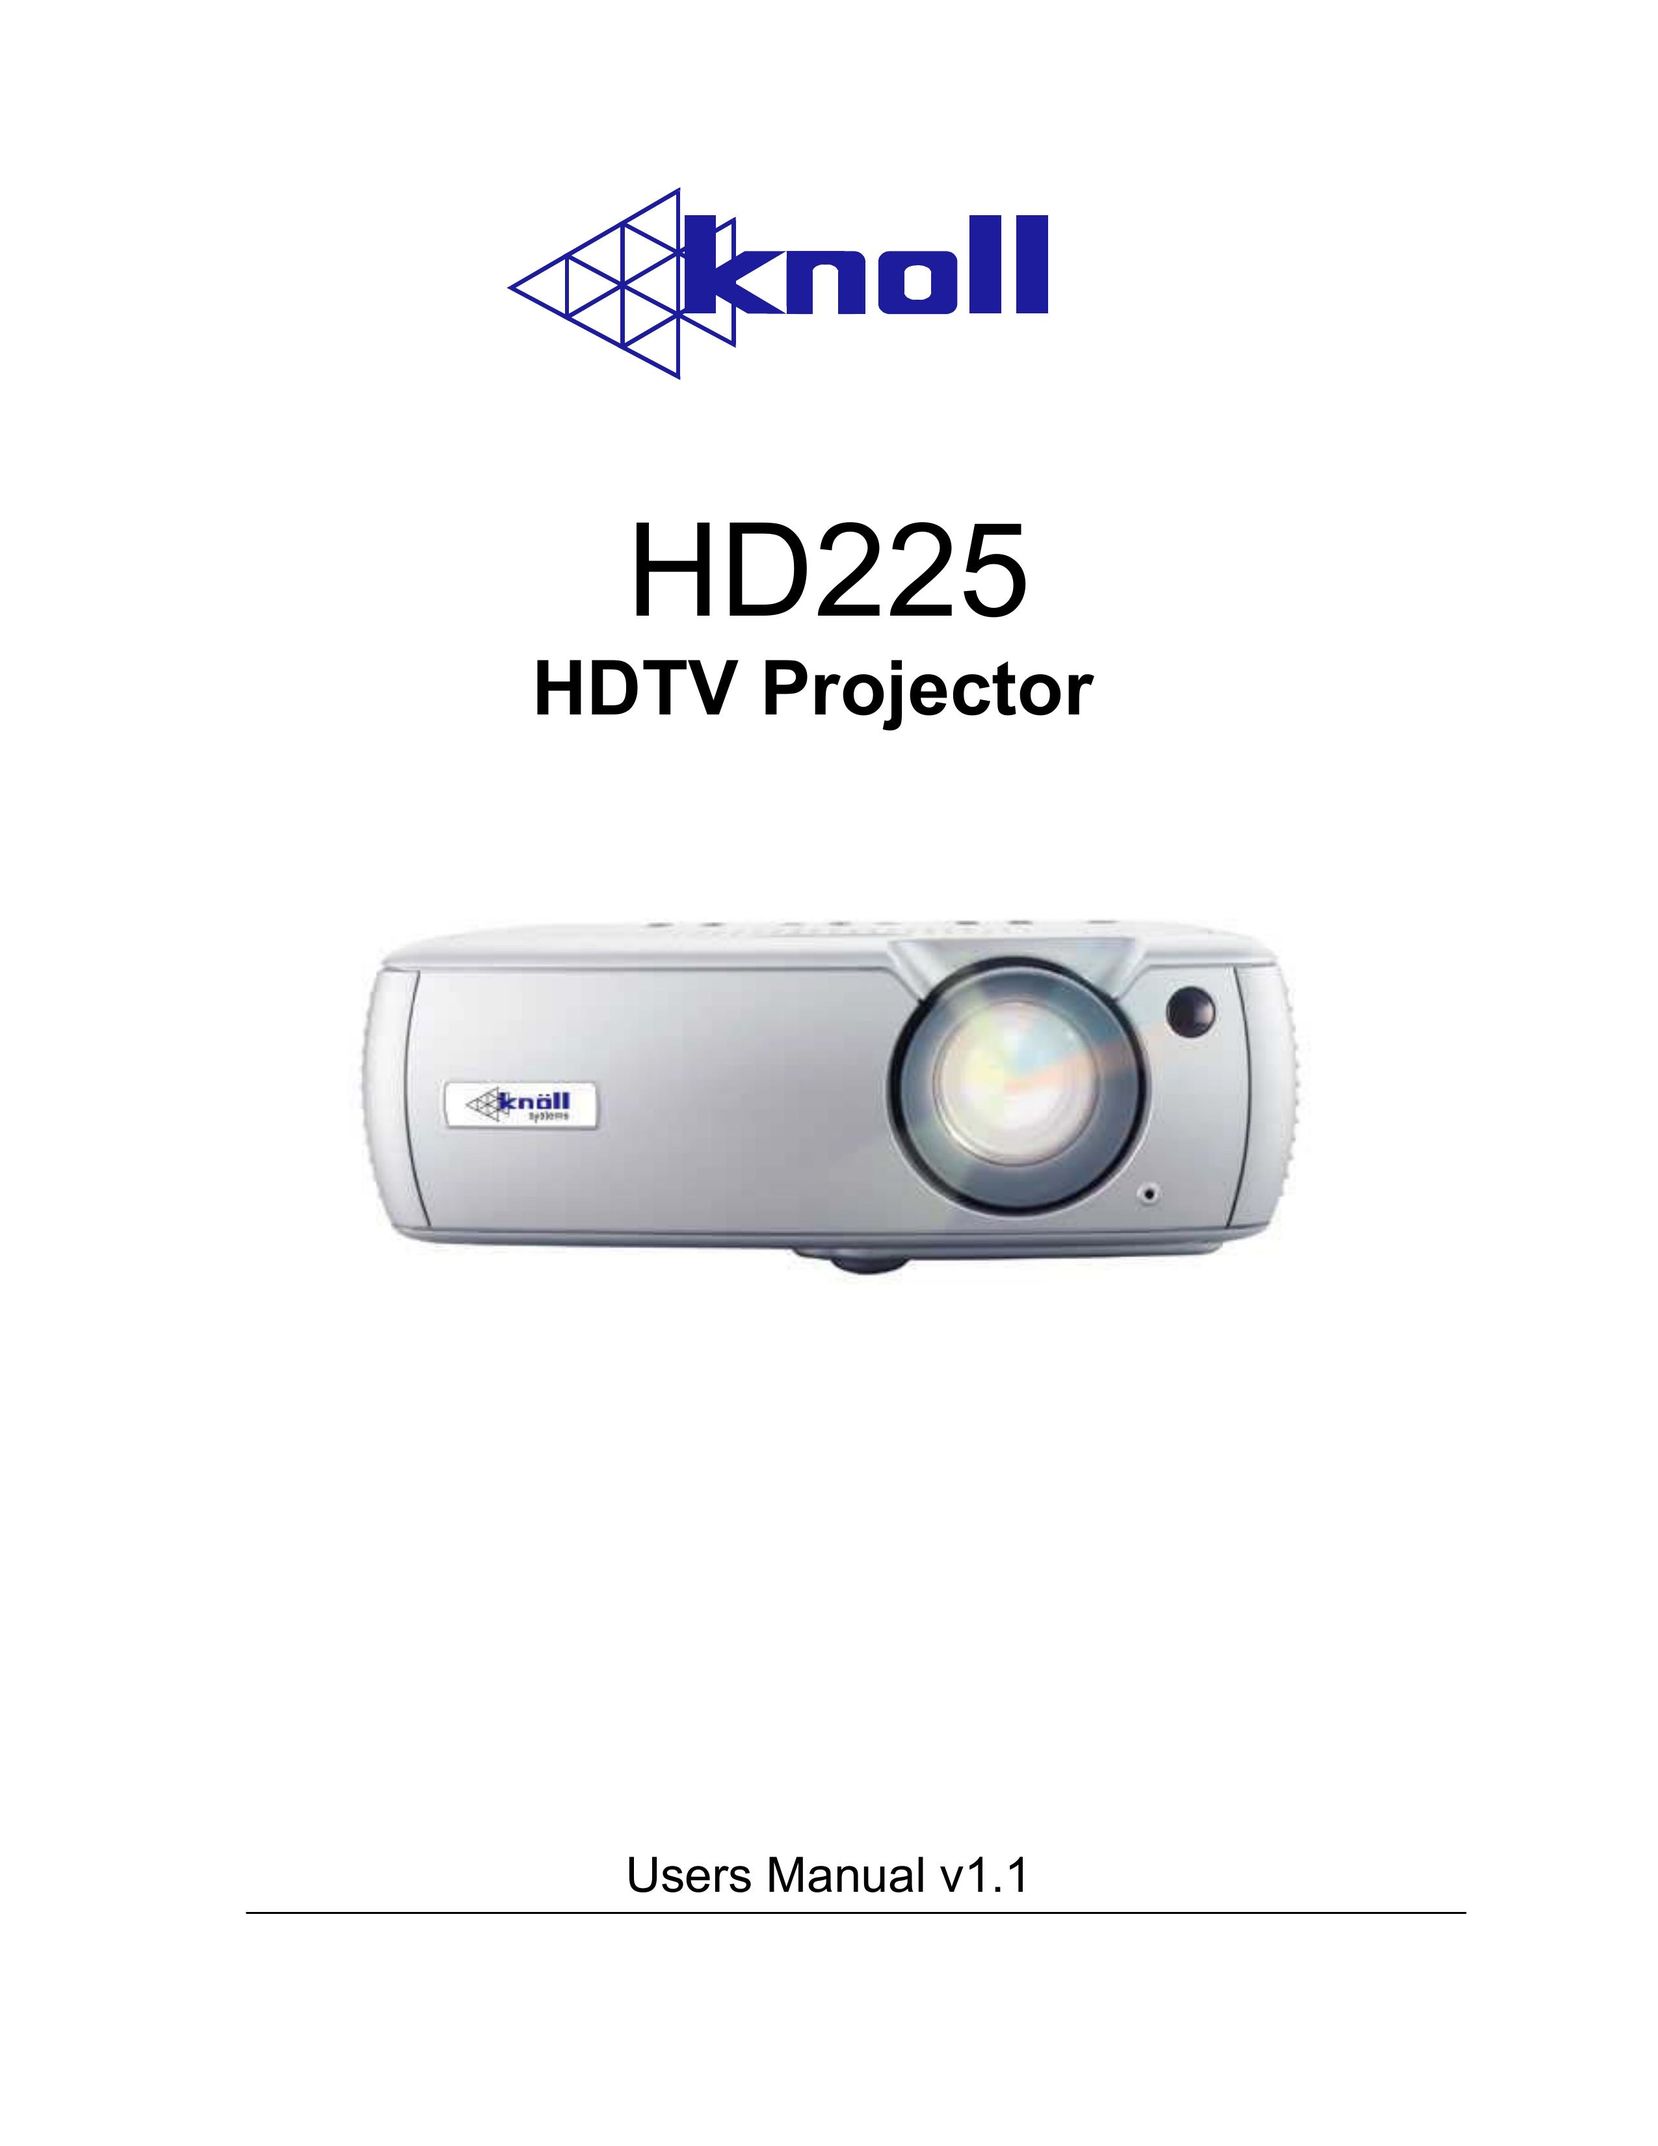 Knoll Systems HD225 Projector User Manual